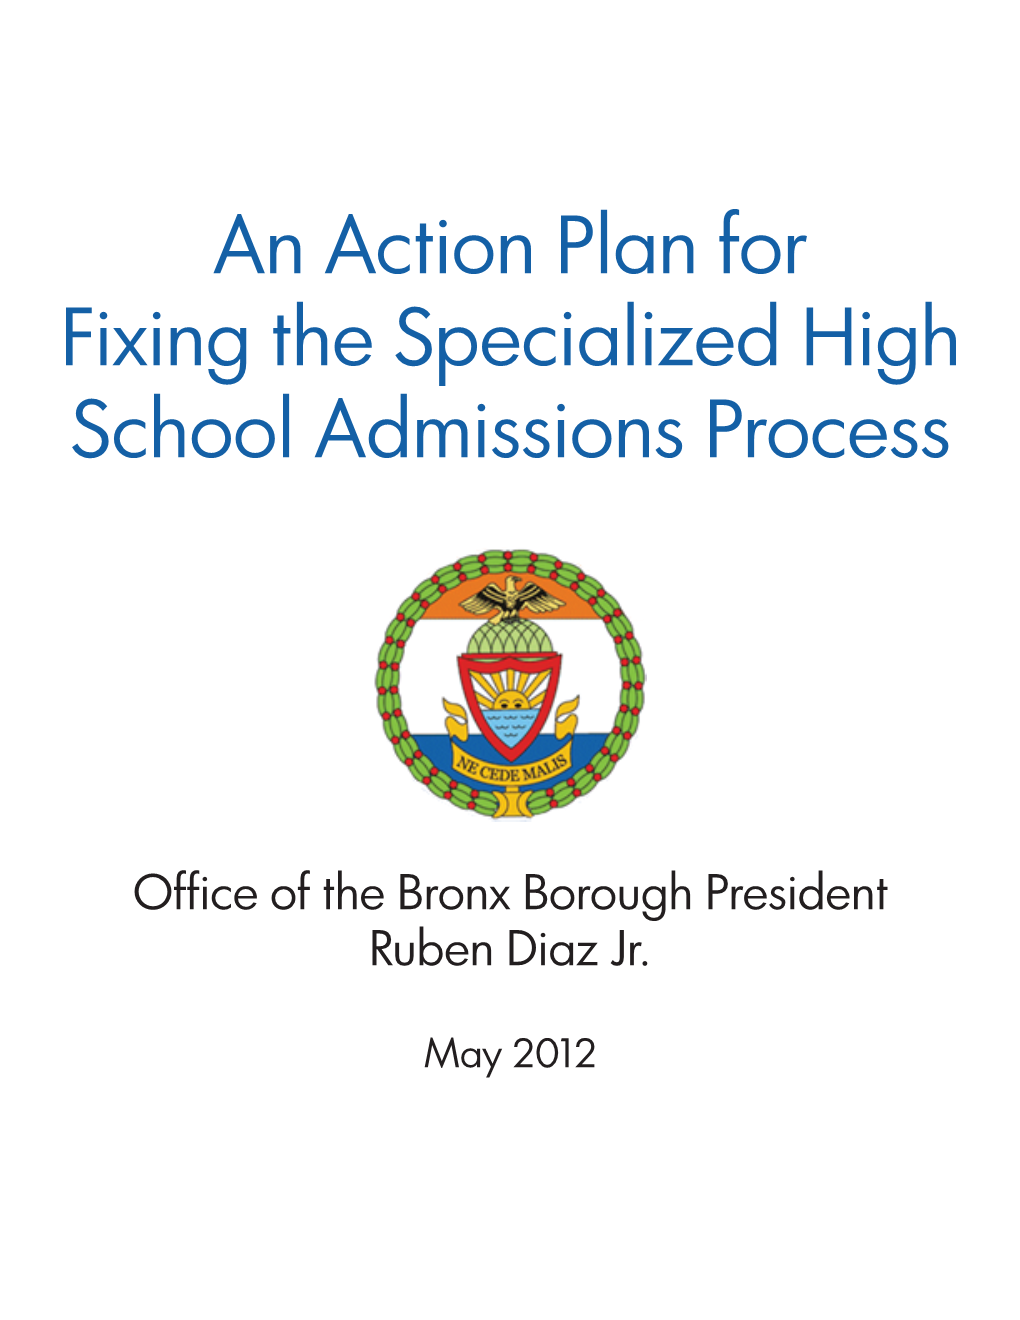 An Action Plan for Fixing the Specialized High School Admissions Process